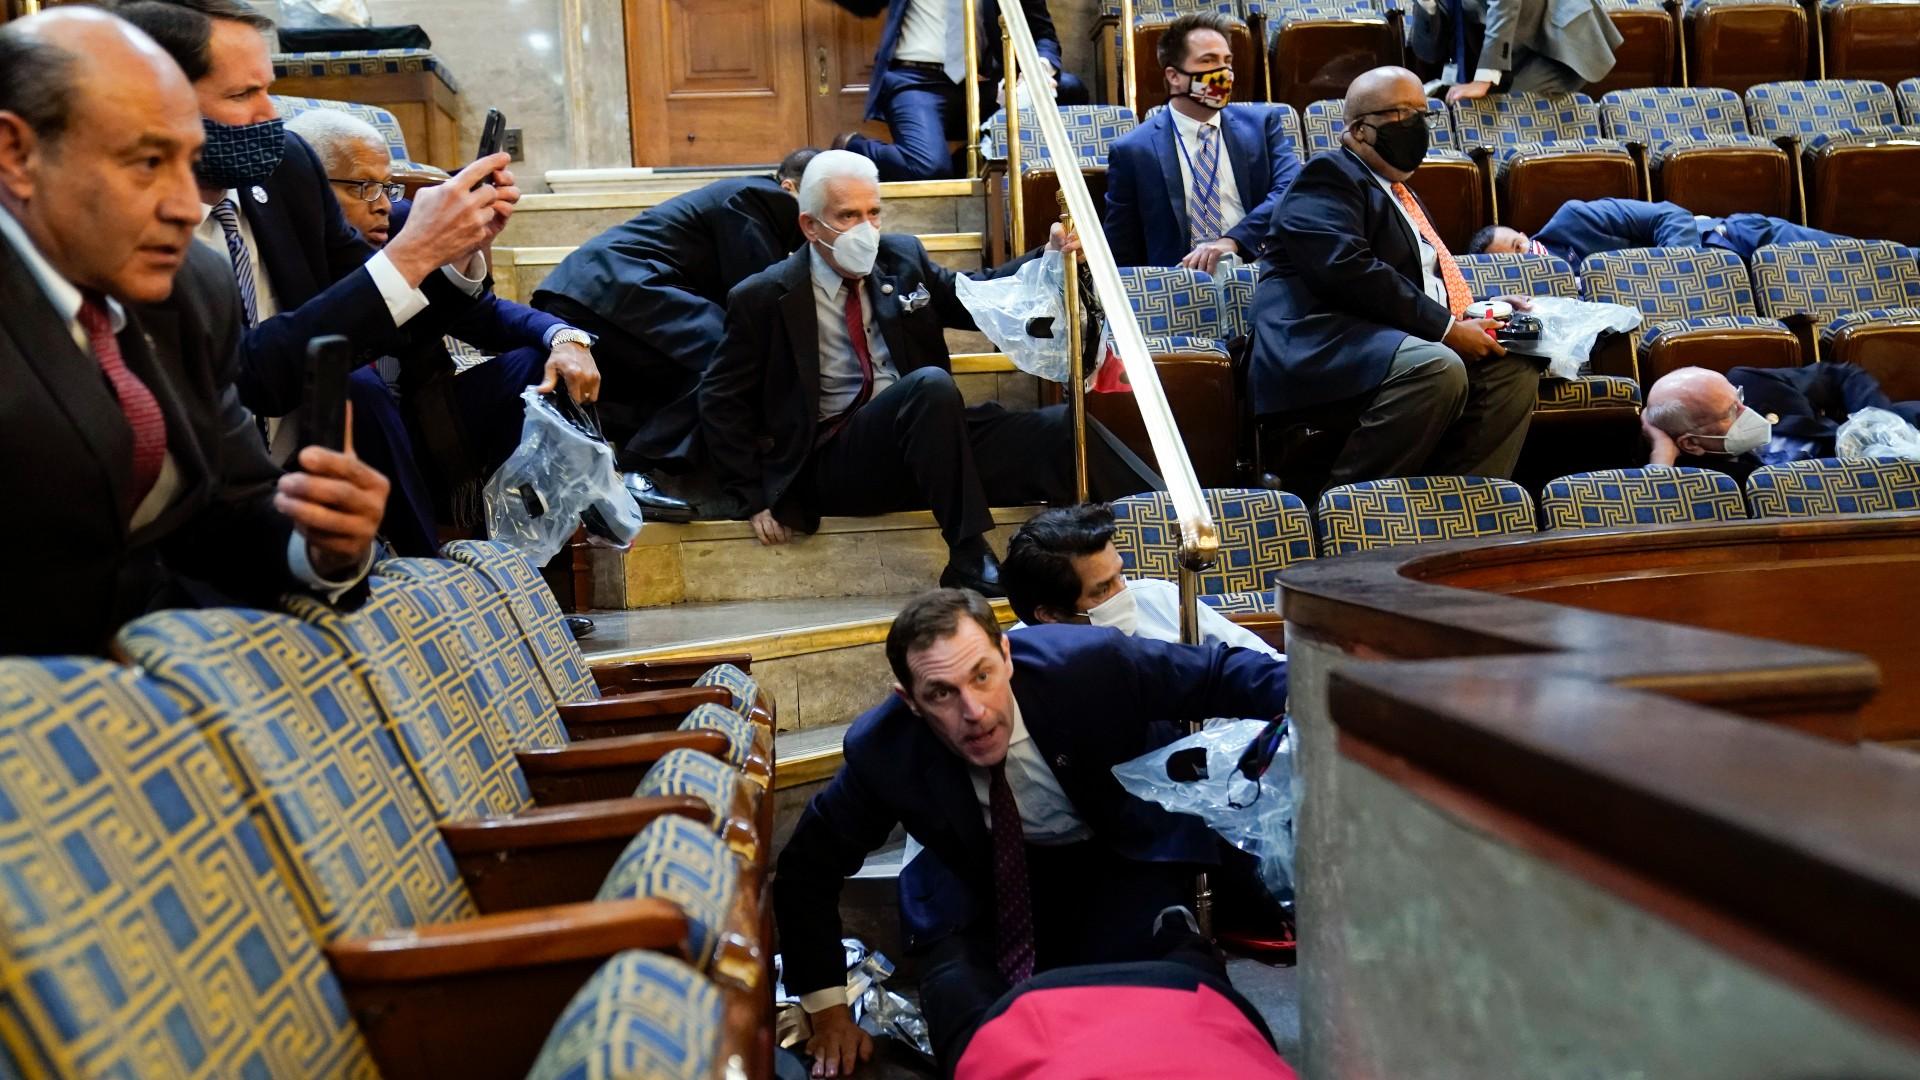 People shelter in the House gallery as protesters try to break into the House Chamber at the U.S. Capitol on Wednesday, Jan. 6, 2021, in Washington. (AP Photo / Andrew Harnik)